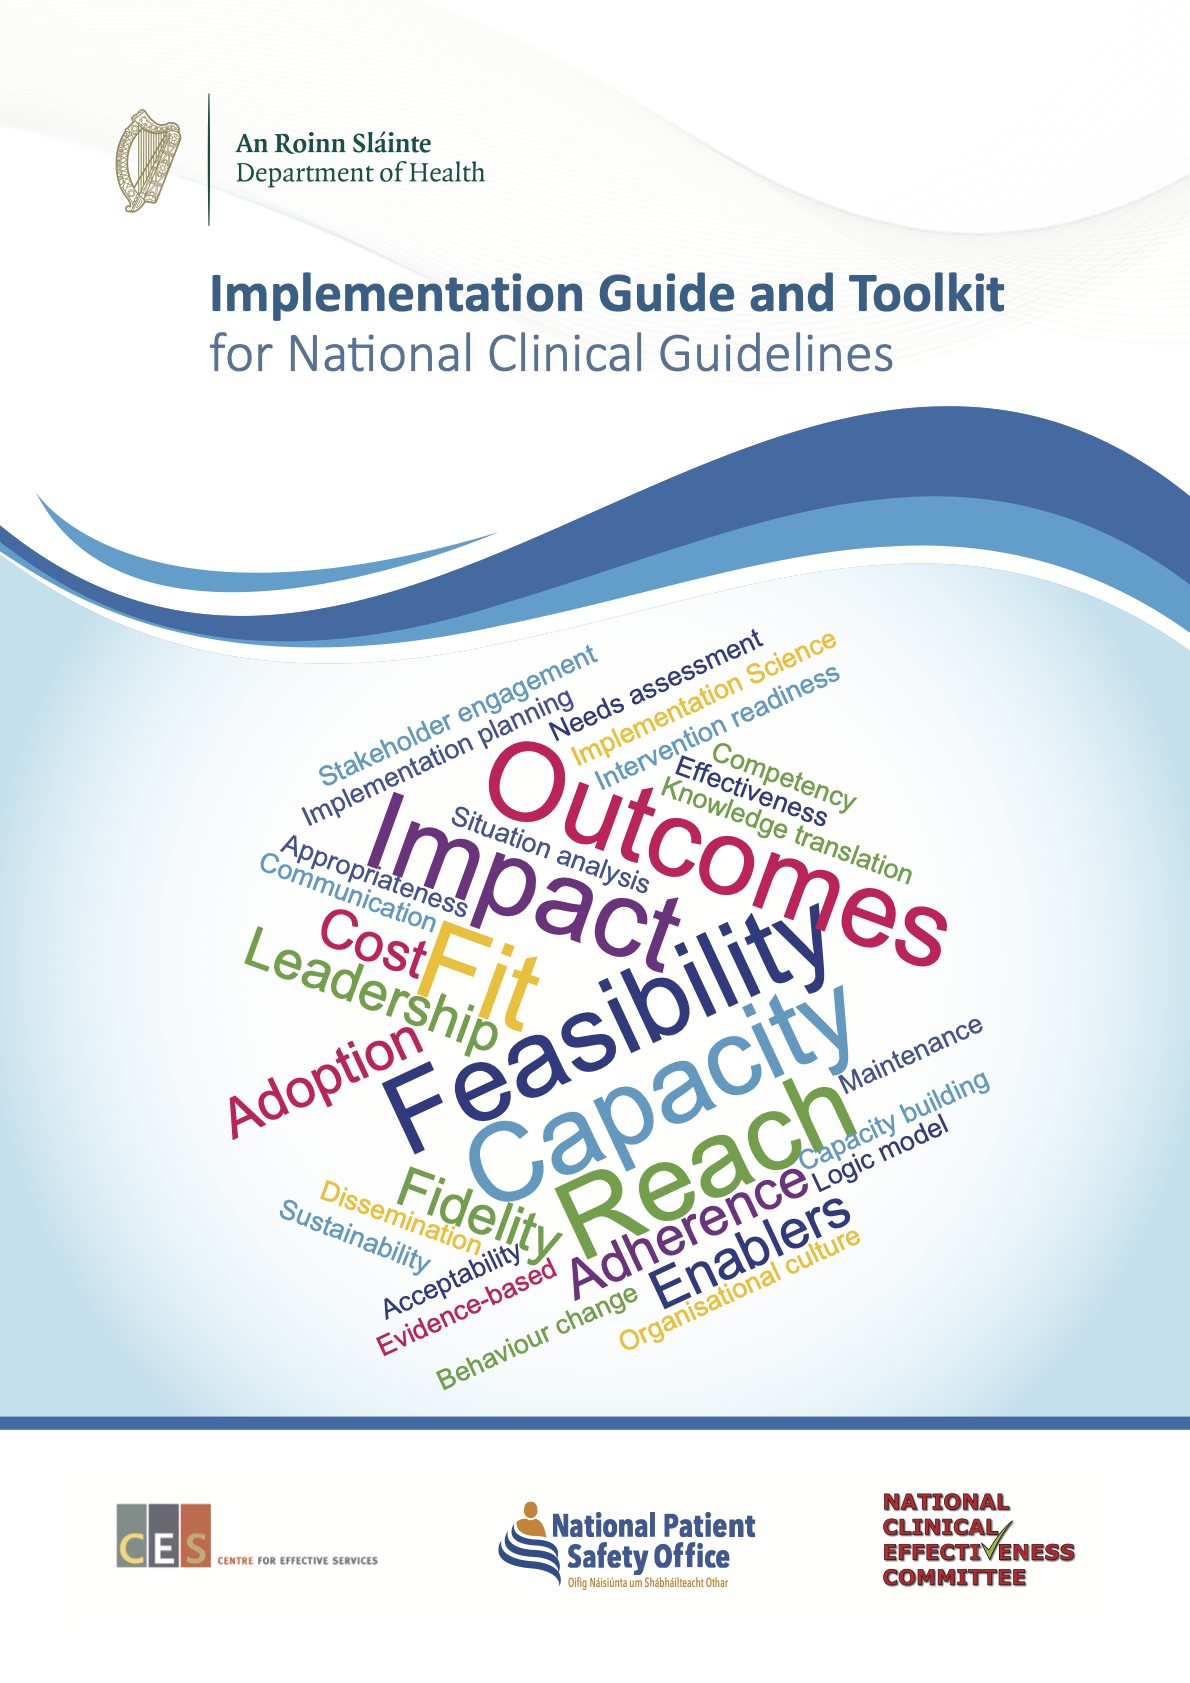 Implementation Guide and Toolkit for National Clinical Guidelines